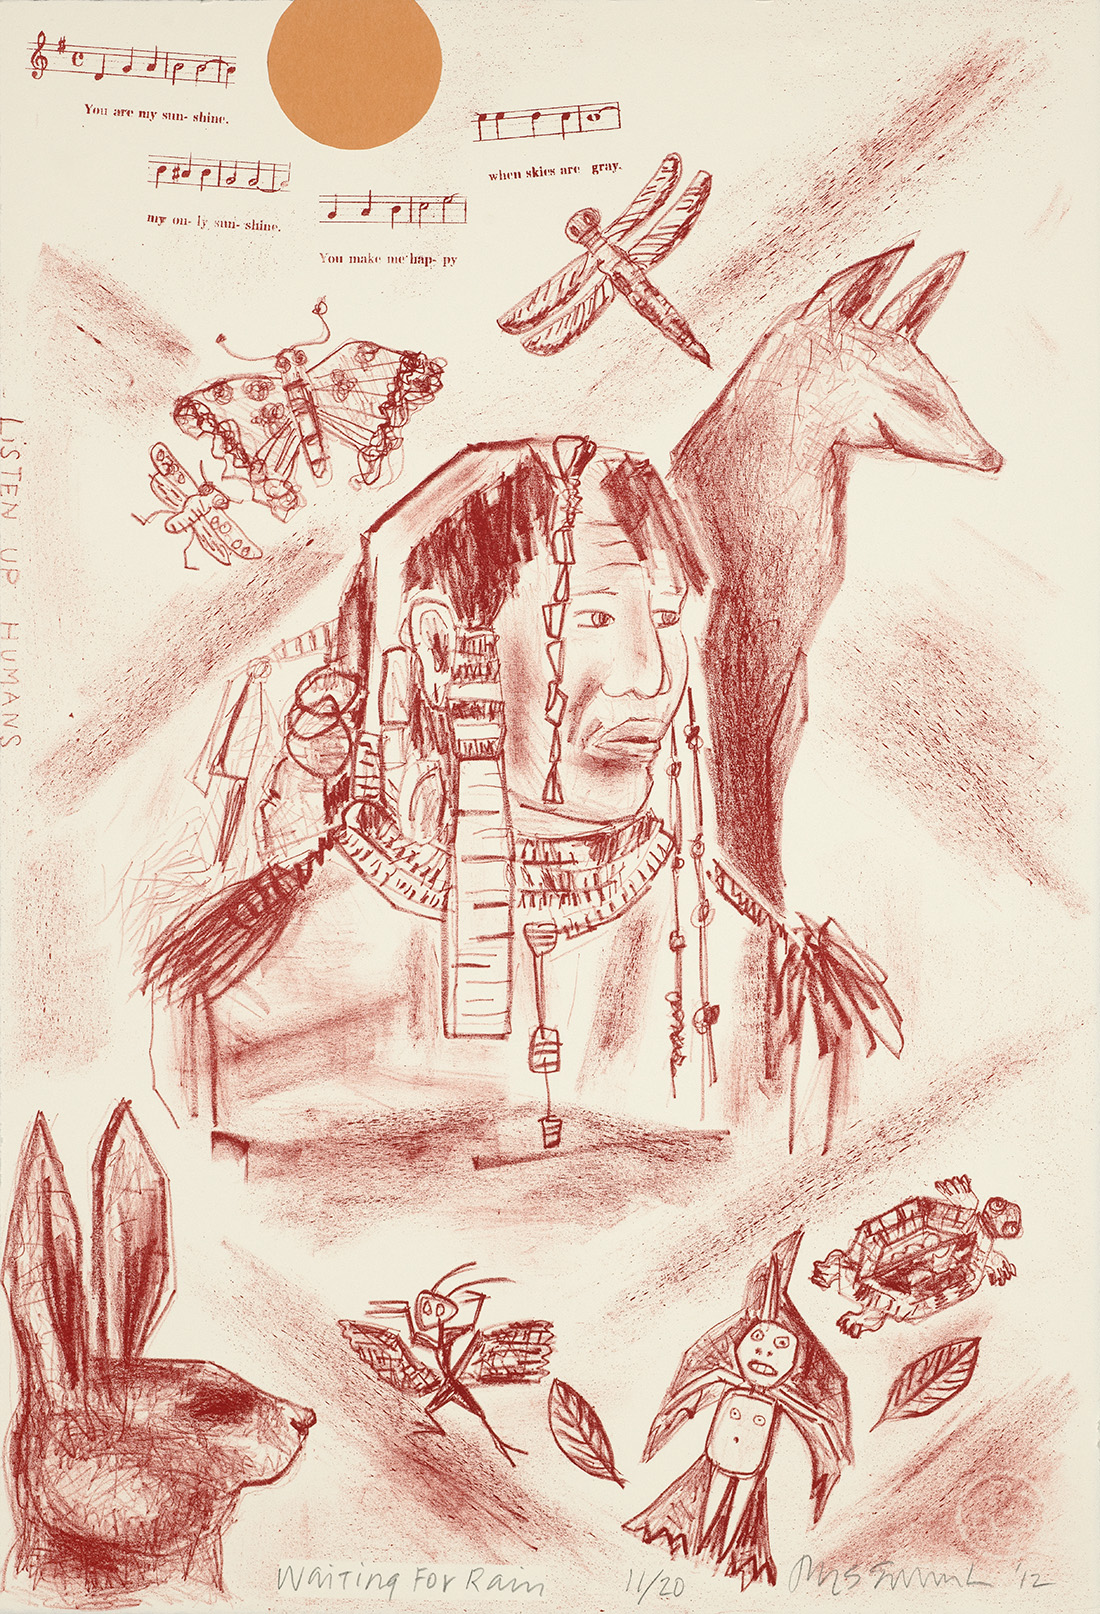 A lithograhph showing a Native American man surrounded by animals